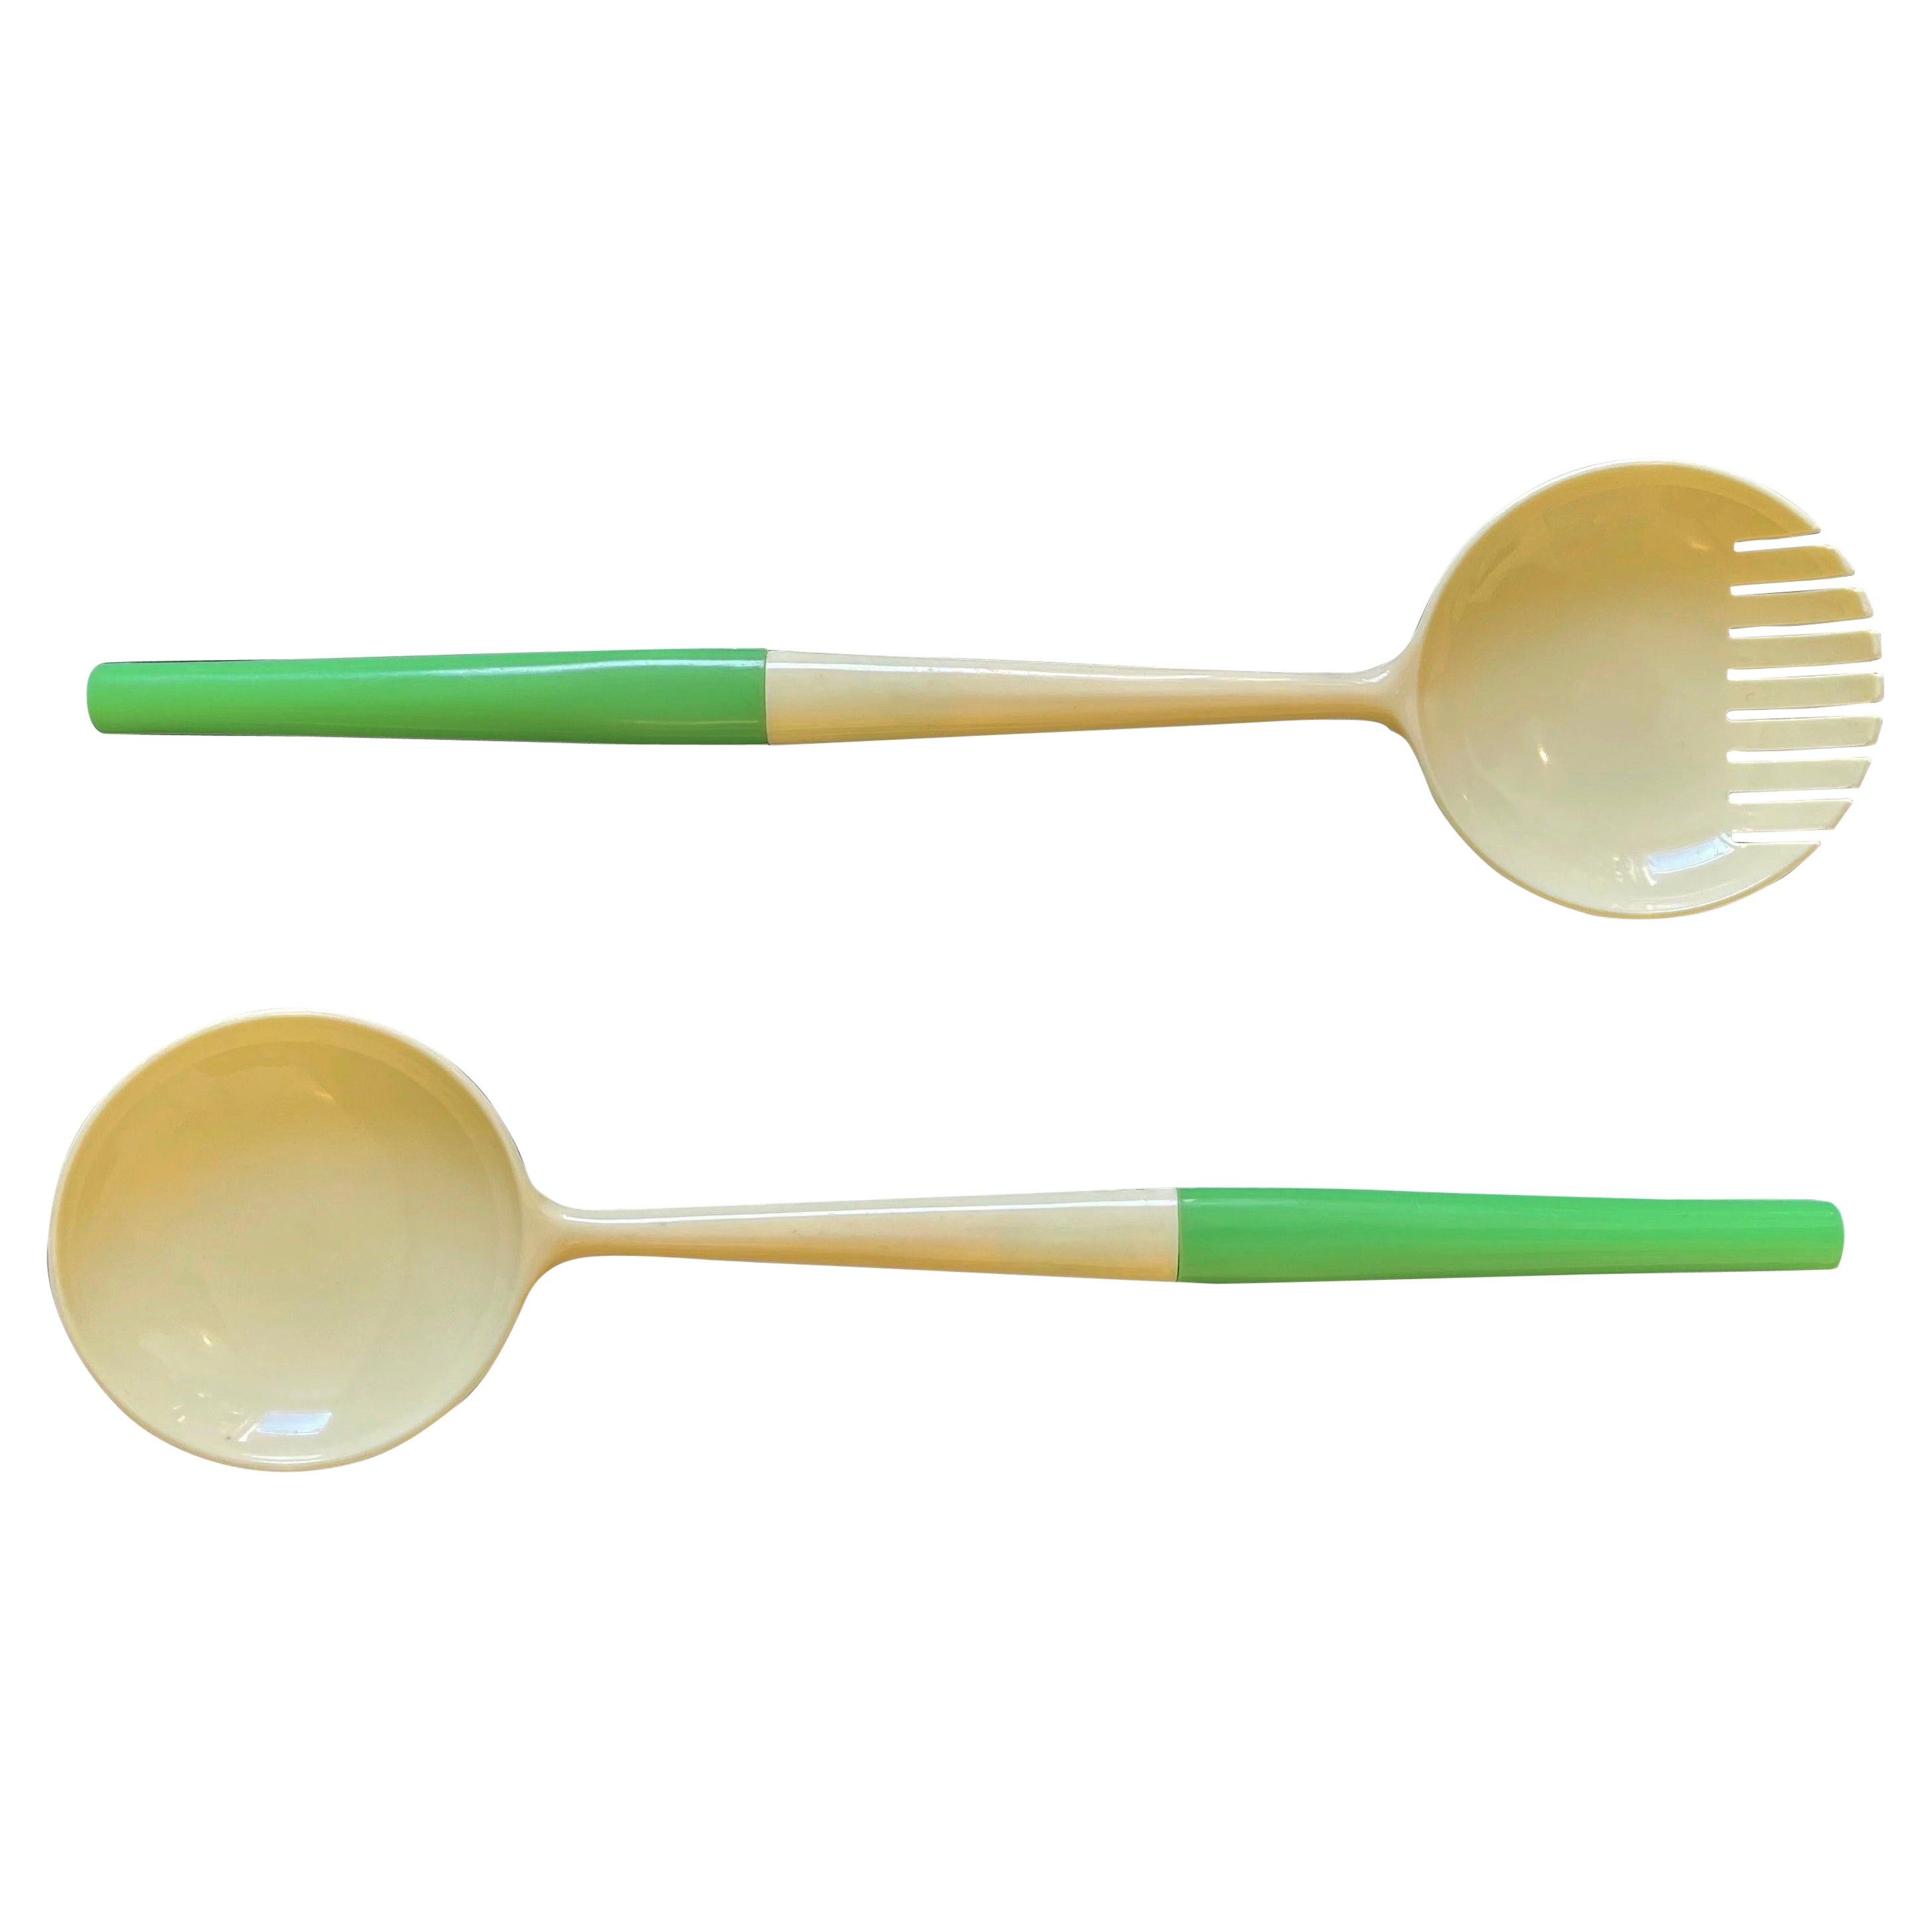 Kartell Salad Spoon & Fork Casalinghi, 1958 Design, Gino Colombini, Milan, Italy For Sale